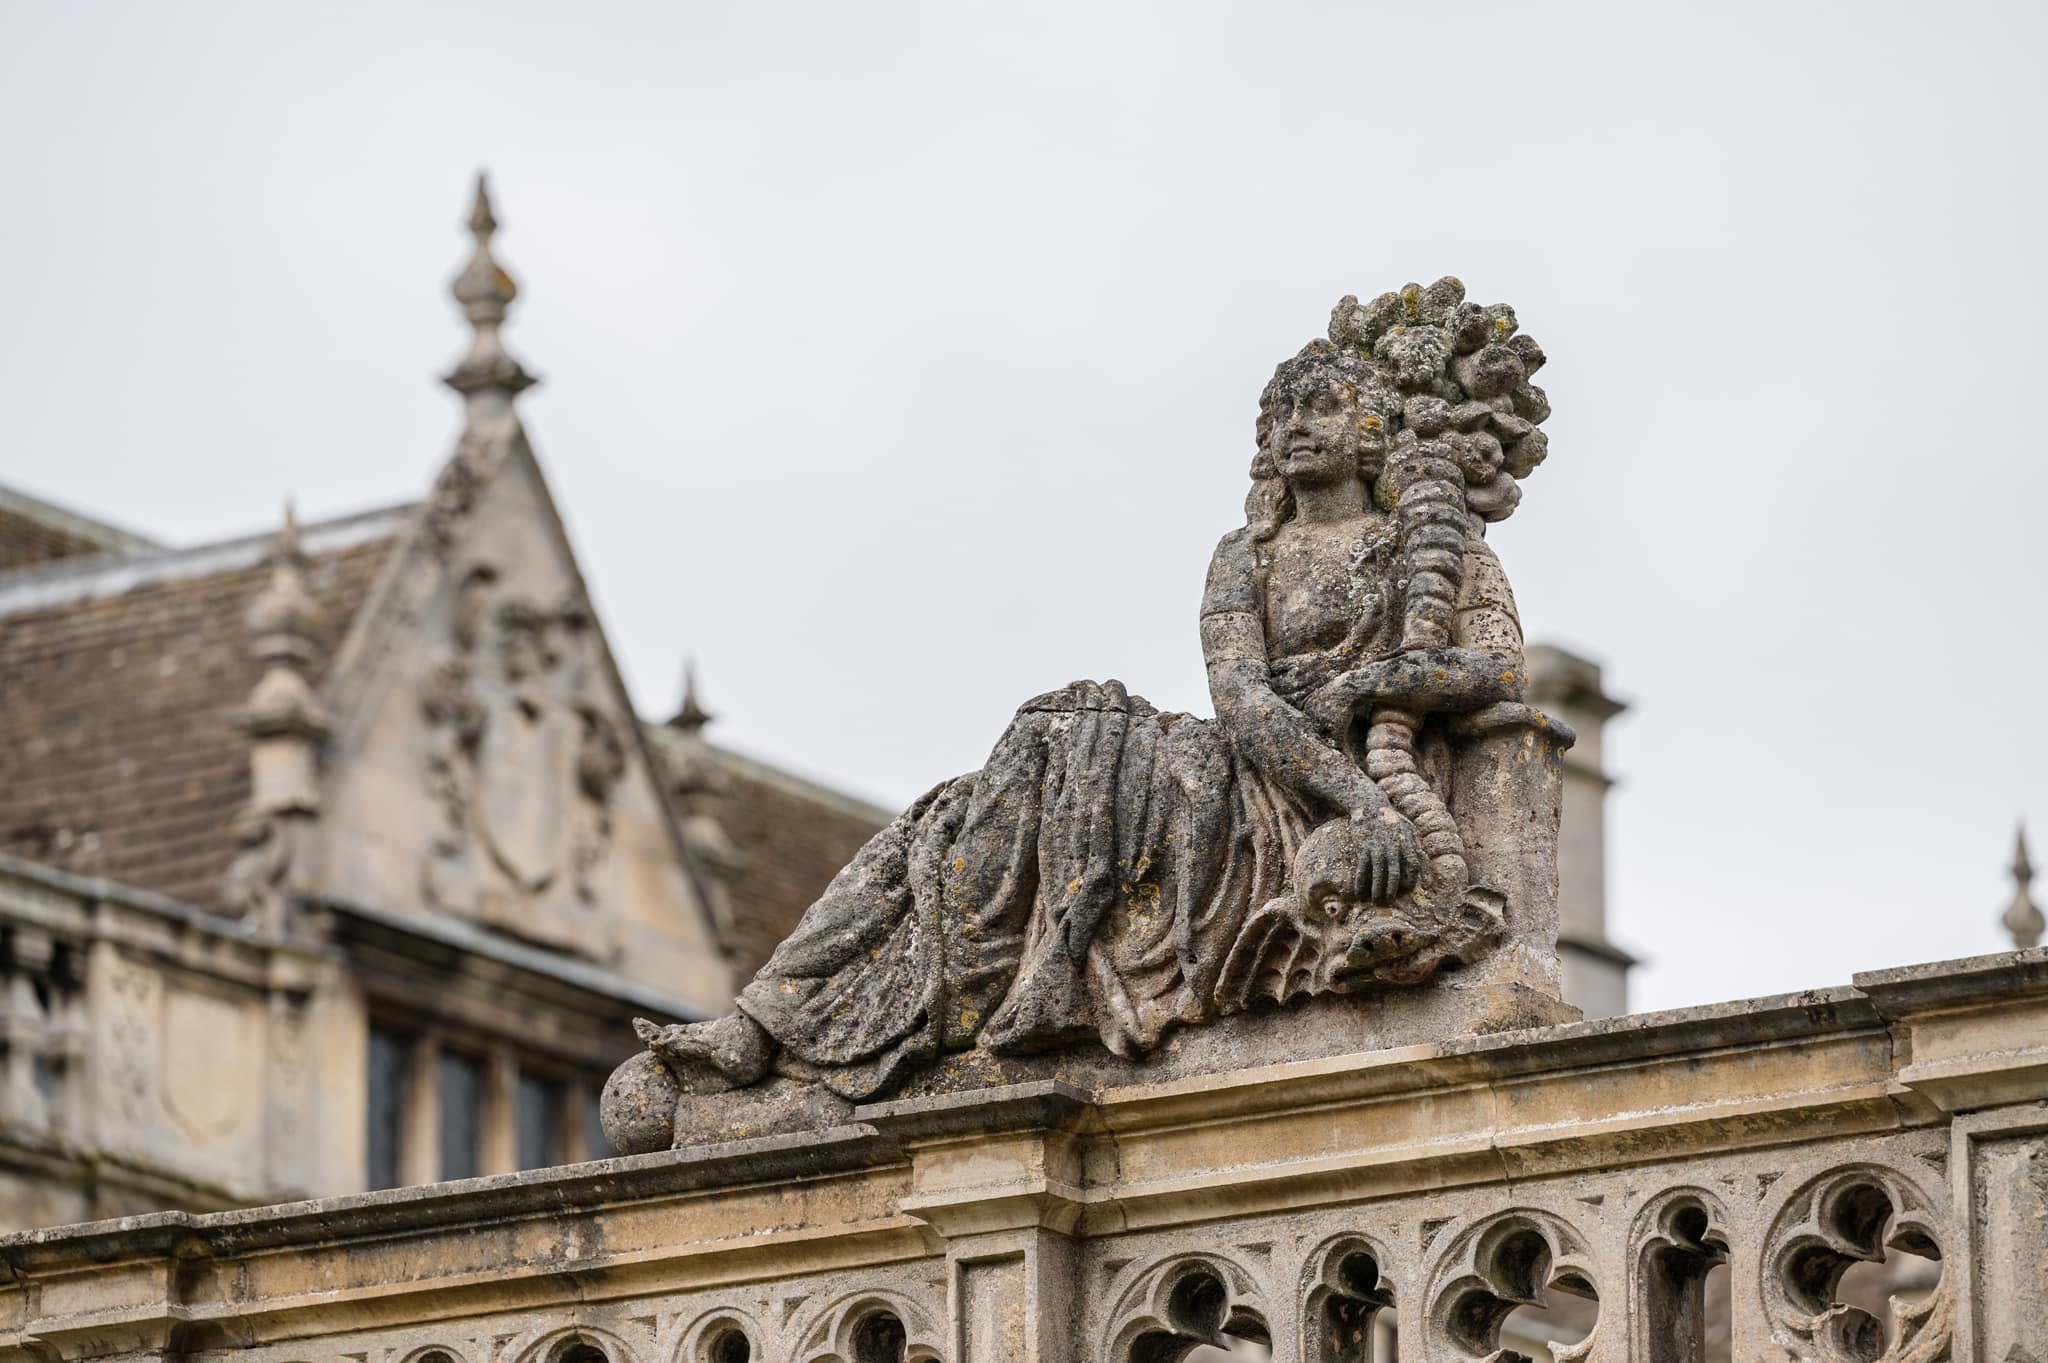 A statue on the roof at the entrance to Rushton Hall